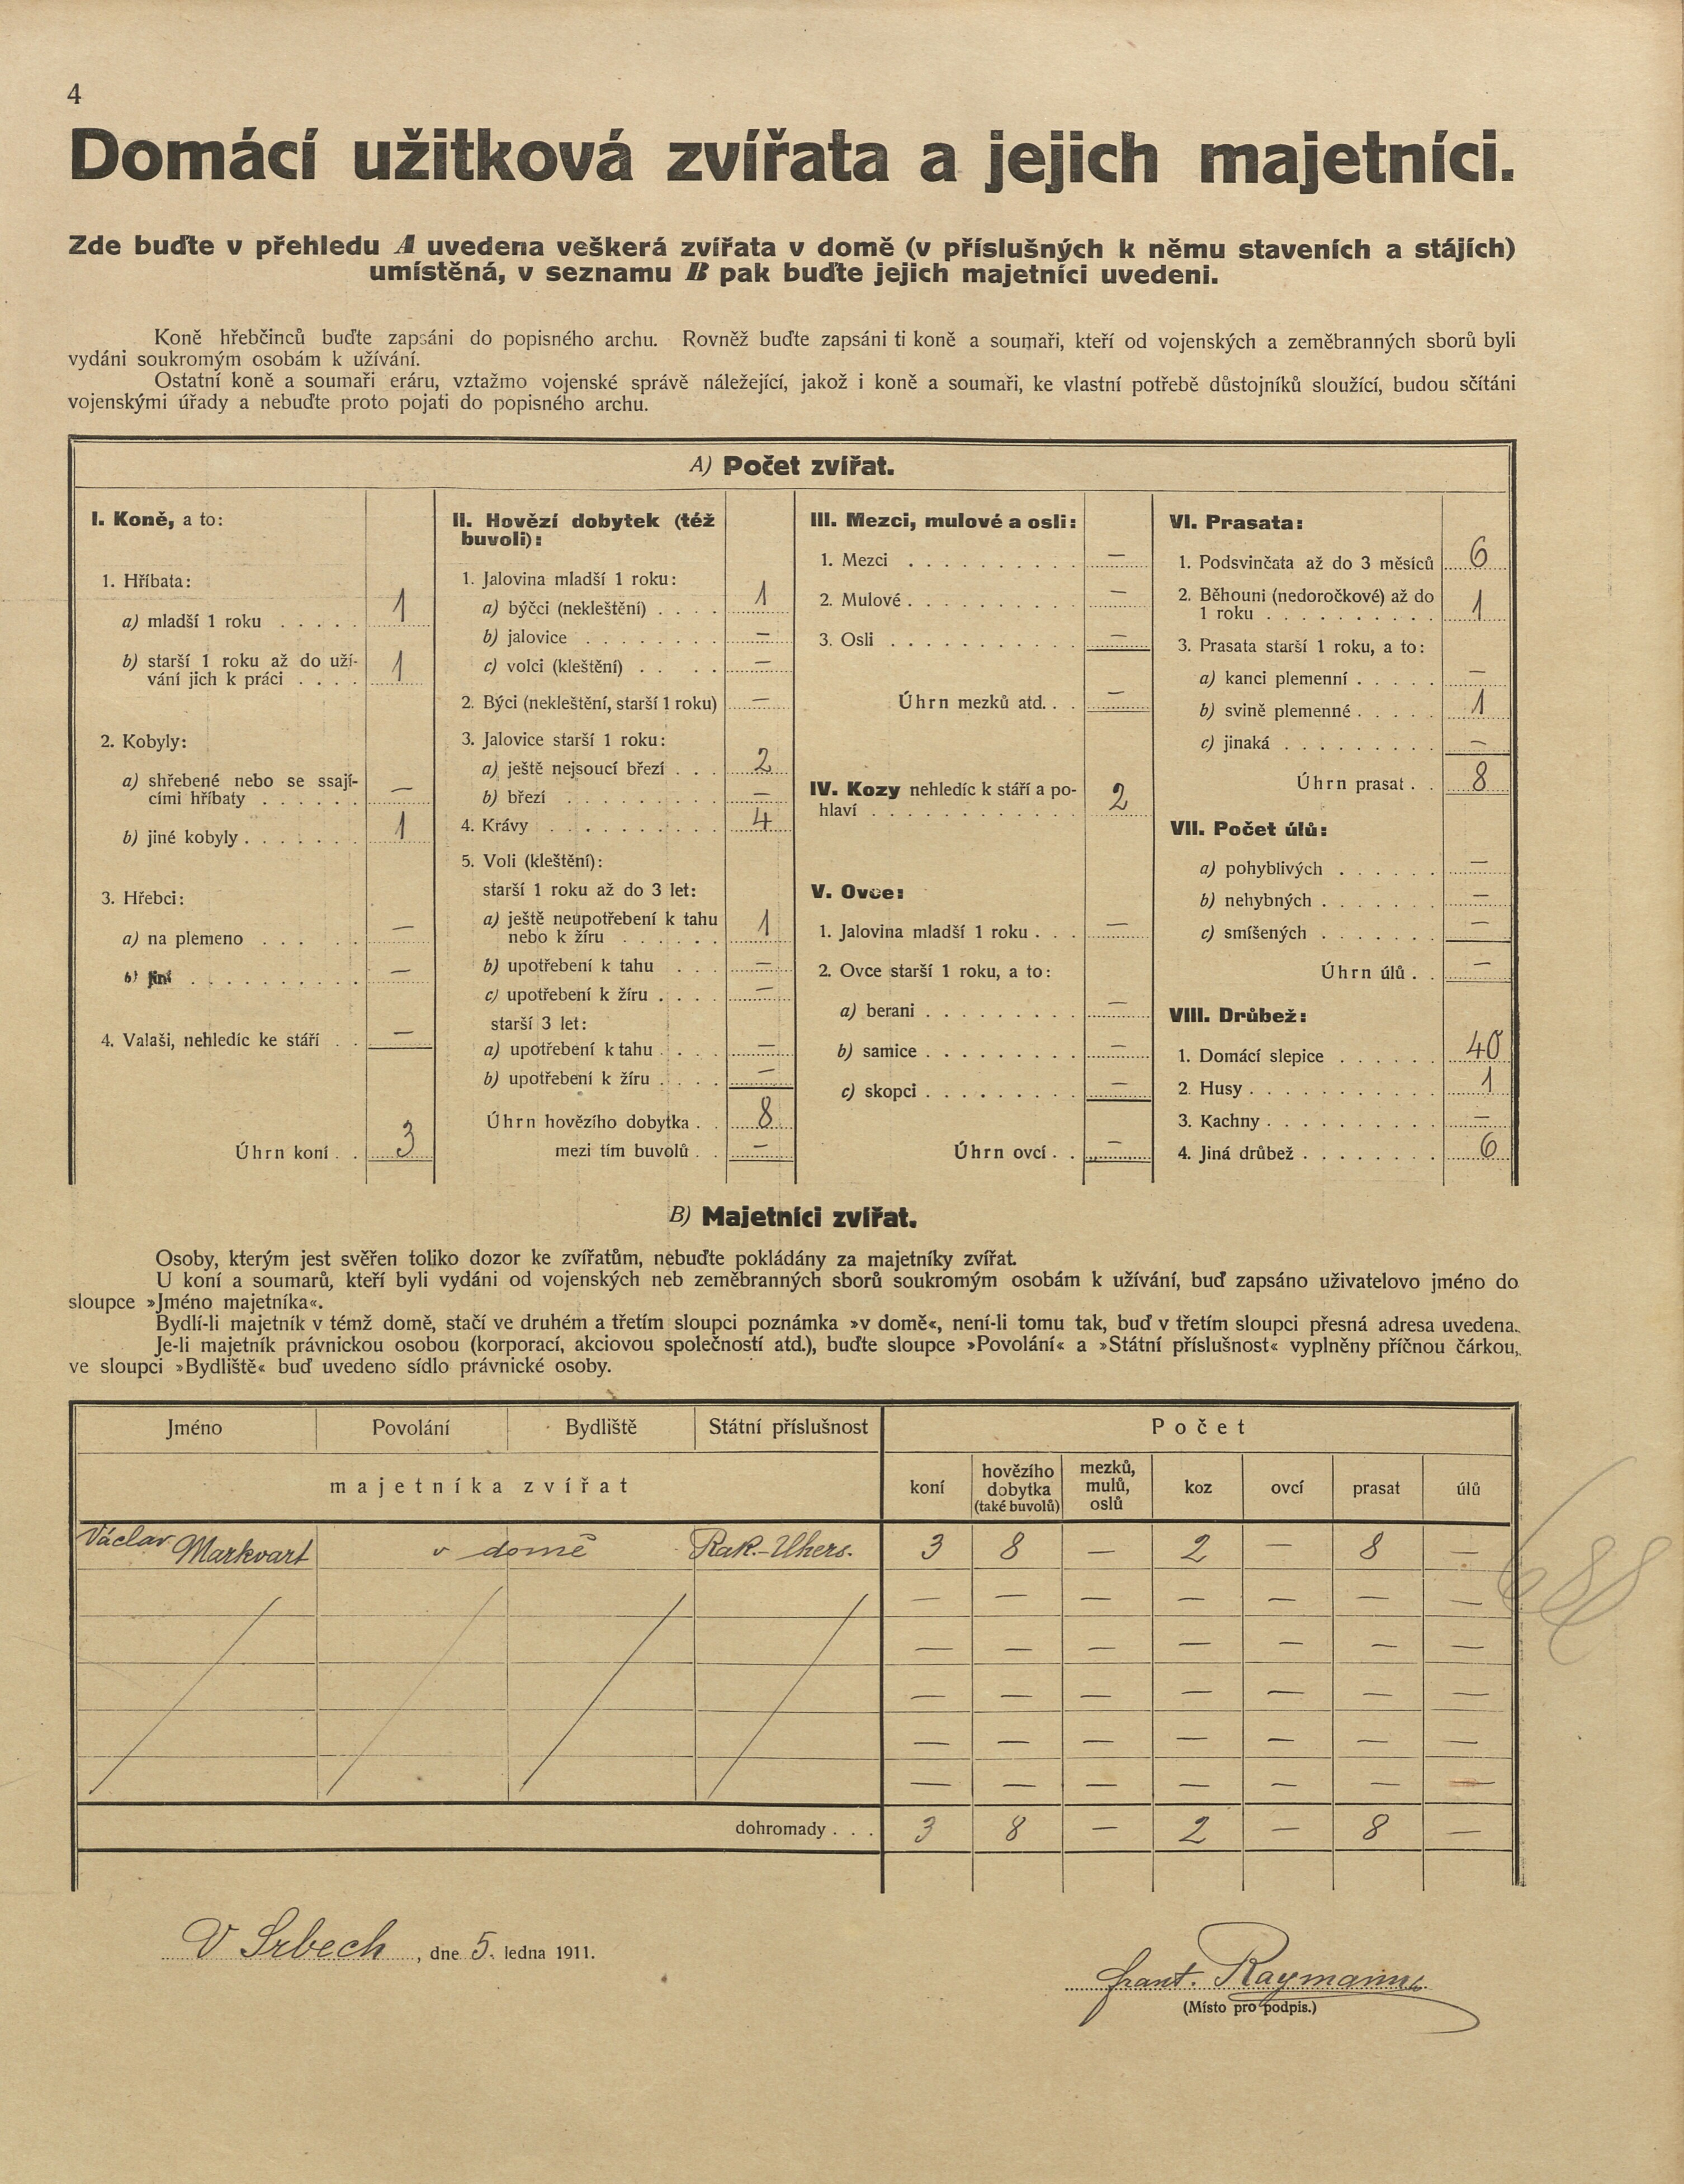 4. soap-pj_00302_census-1910-srby-cp005_0040